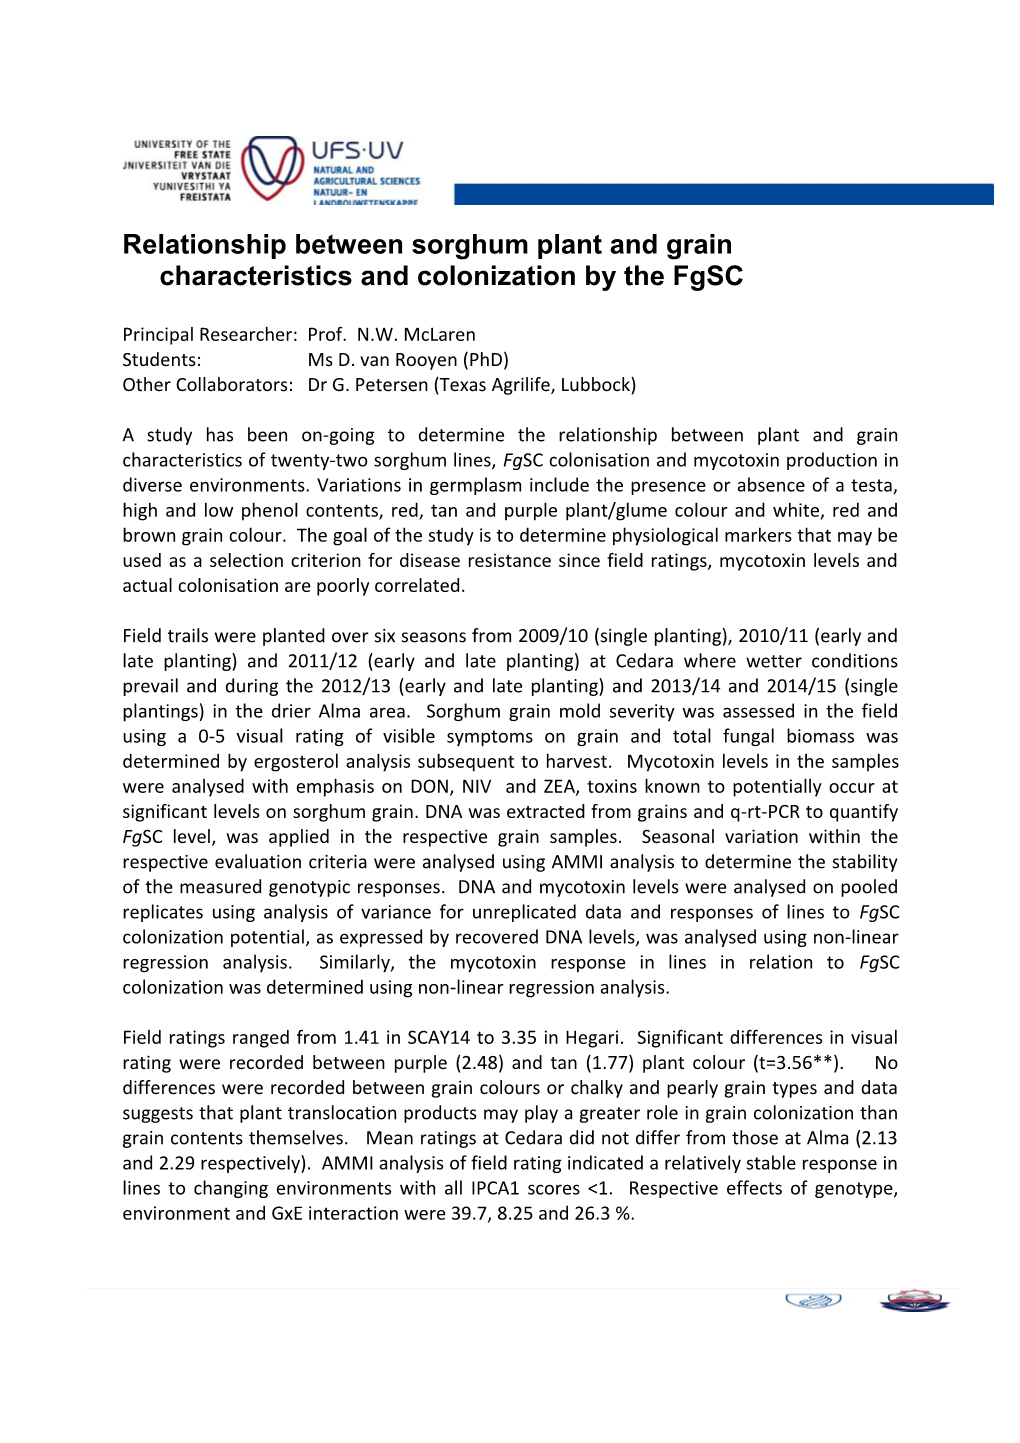 Relationship Between Sorghum Plant and Grain Characteristics and Colonization by the Fgsc